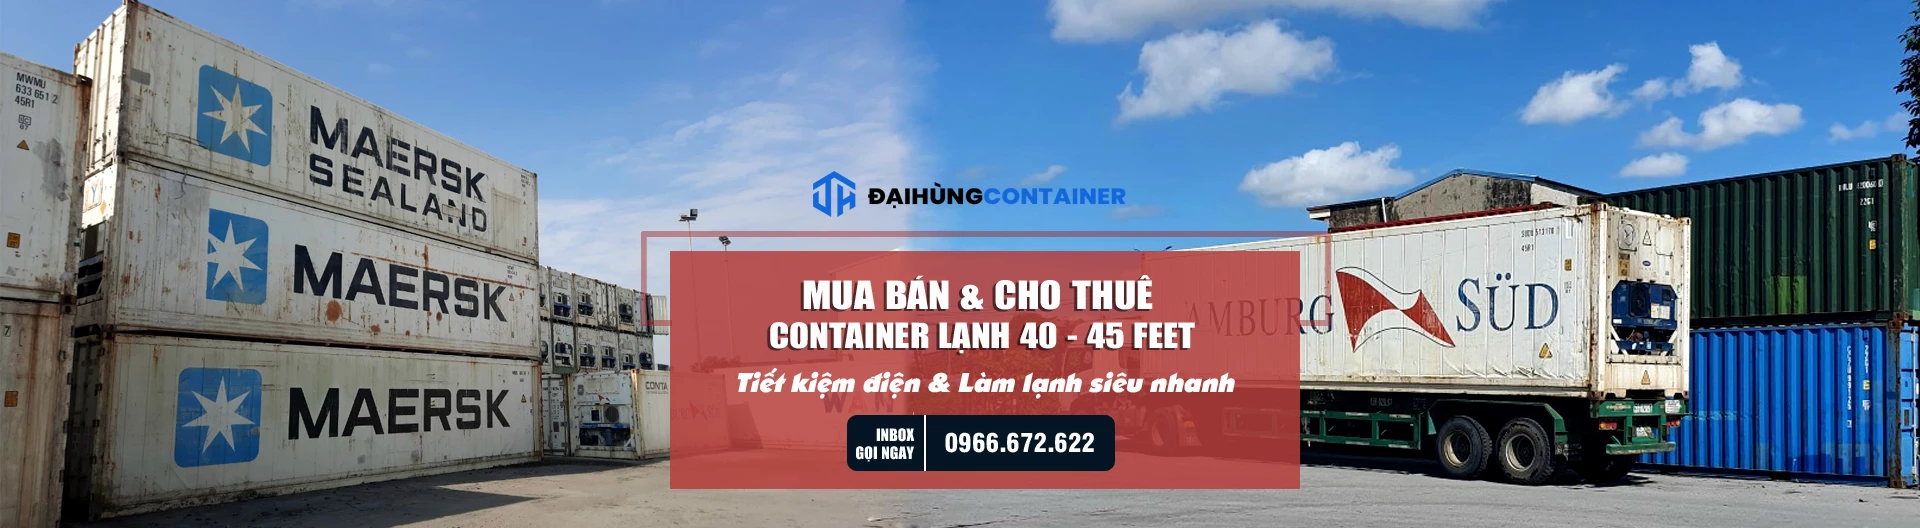 Container Lạnh